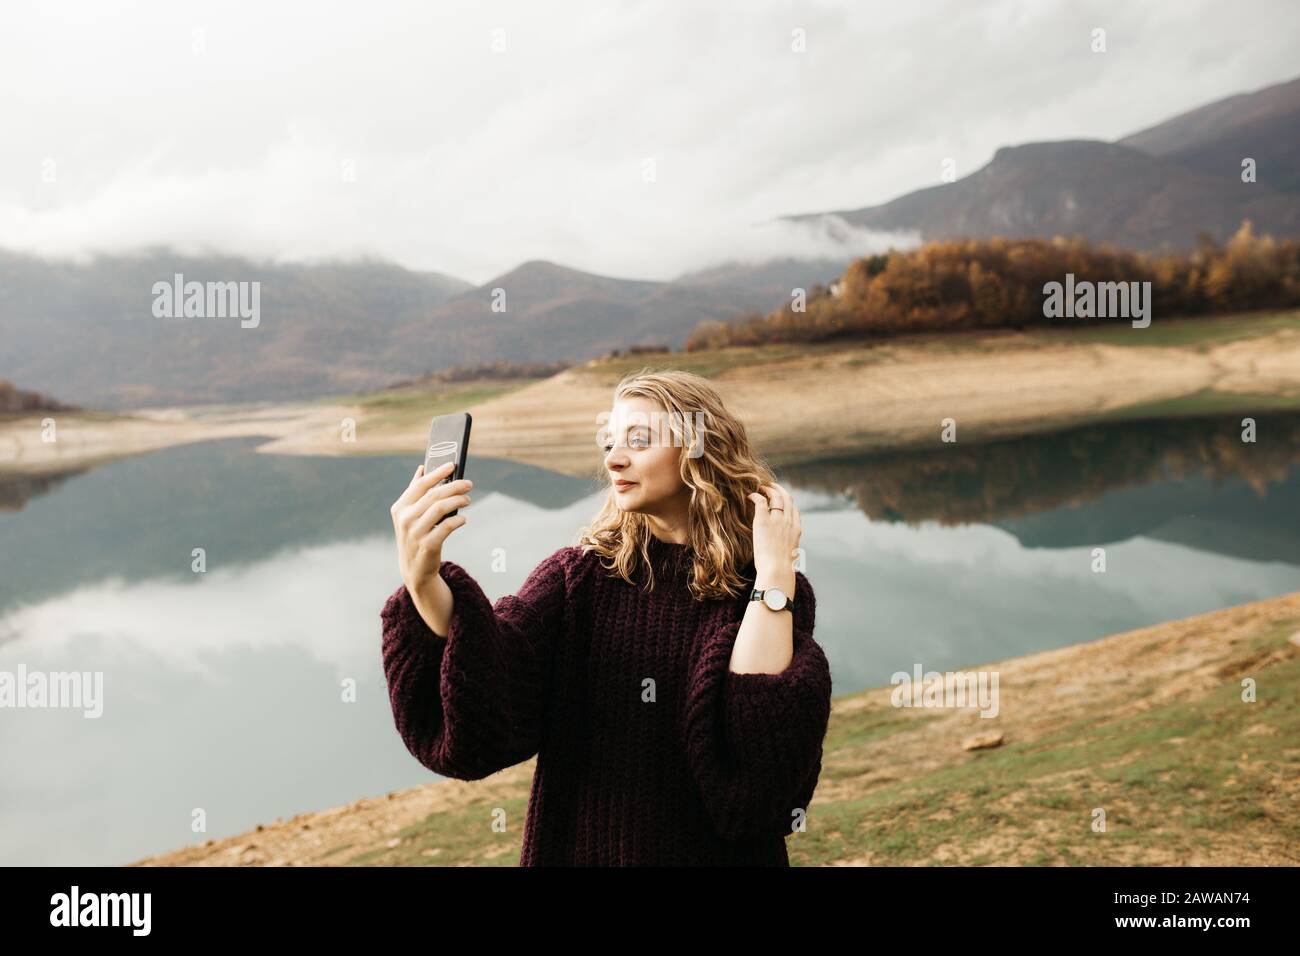 Beautiful woman with curly hair holding mobile phone and taking photos of lake on a cloudy day. She is texting on smartphone and taking selfie. Stock Photo